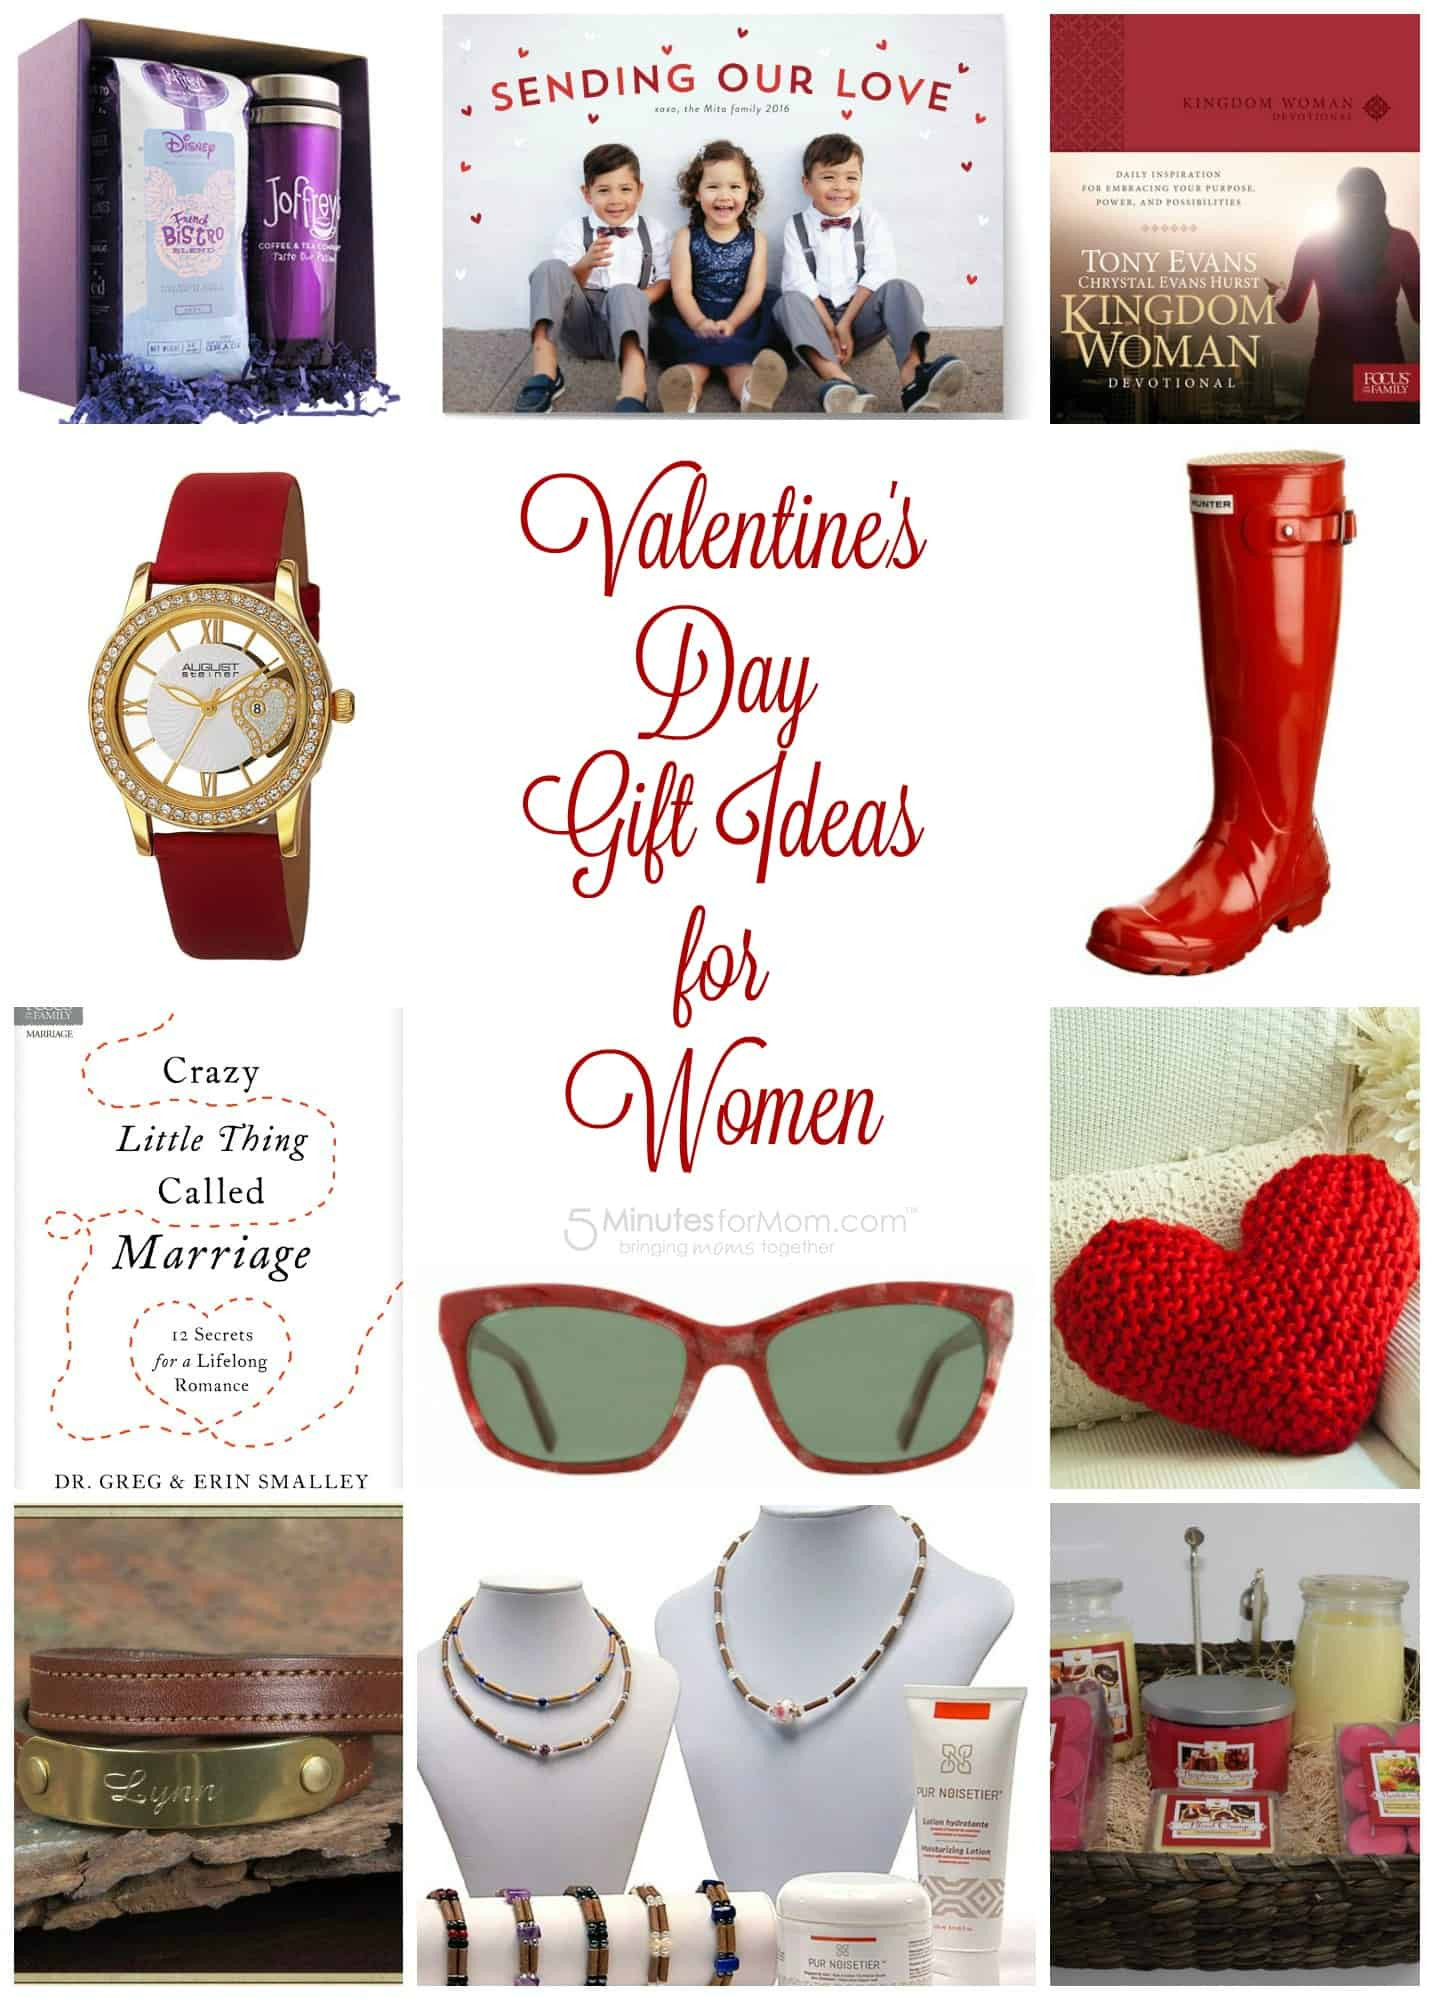 Valentines Gift Ideas for Women Awesome Valentine S Day Gift Guide for Women Plus $100 Amazon